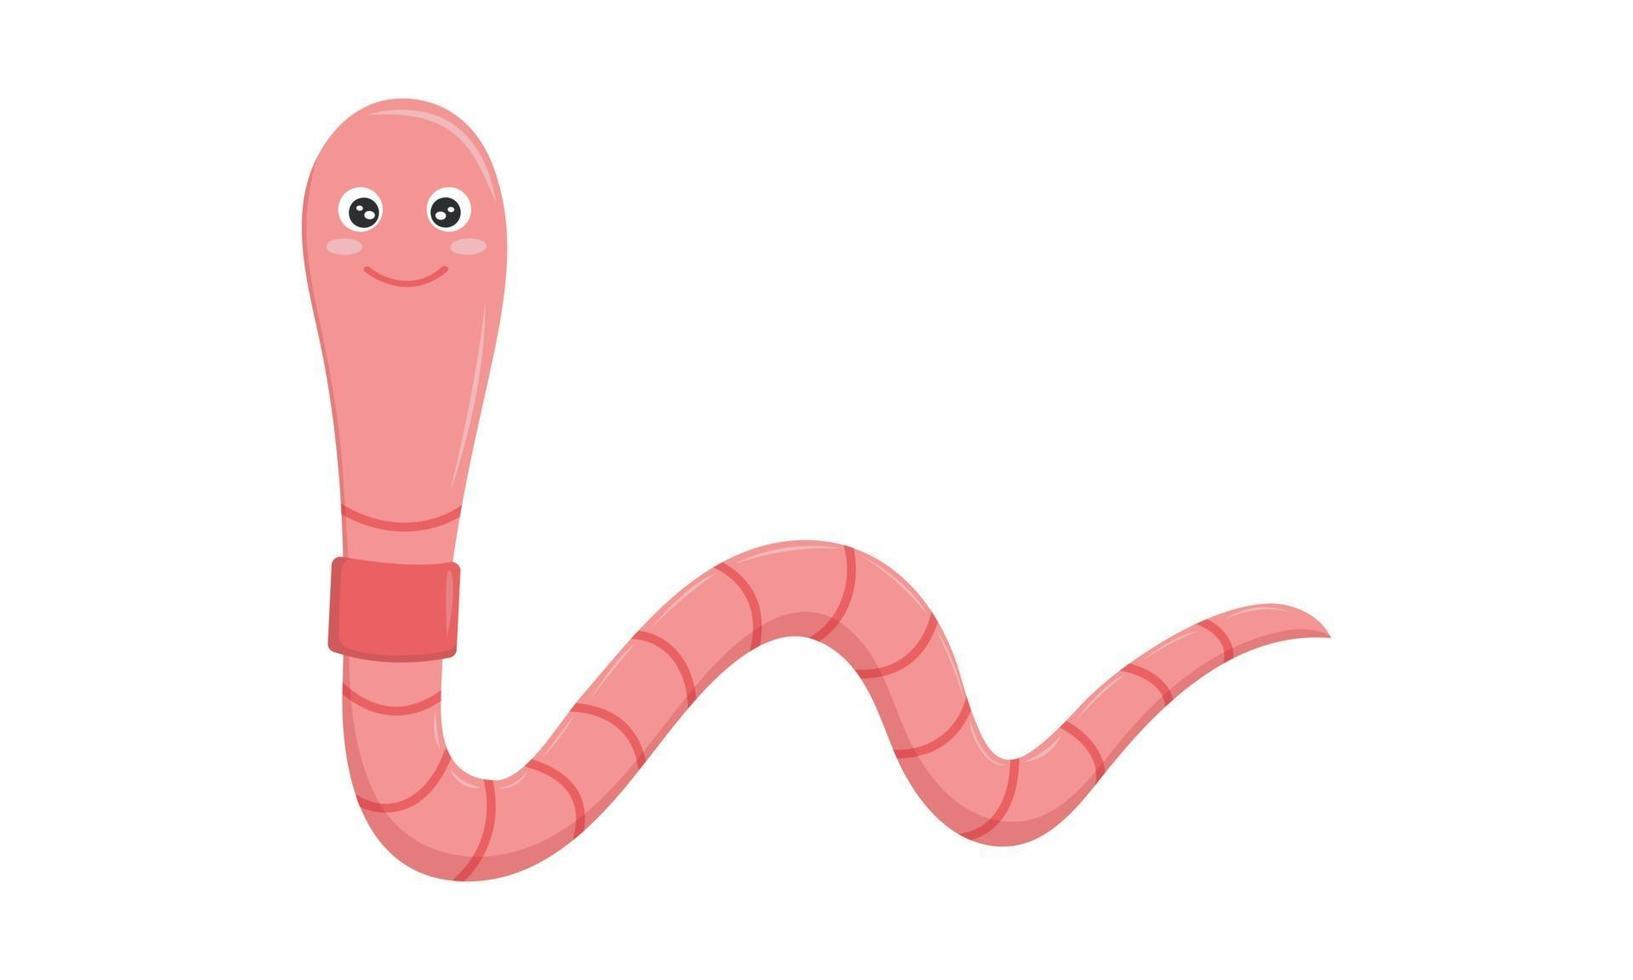 https://static.vecteezy.com/system/resources/previews/002/916/095/non_2x/cute-worm-character-isolated-on-white-background-earthworm-with-smiling-face-in-childish-style-vector.jpg